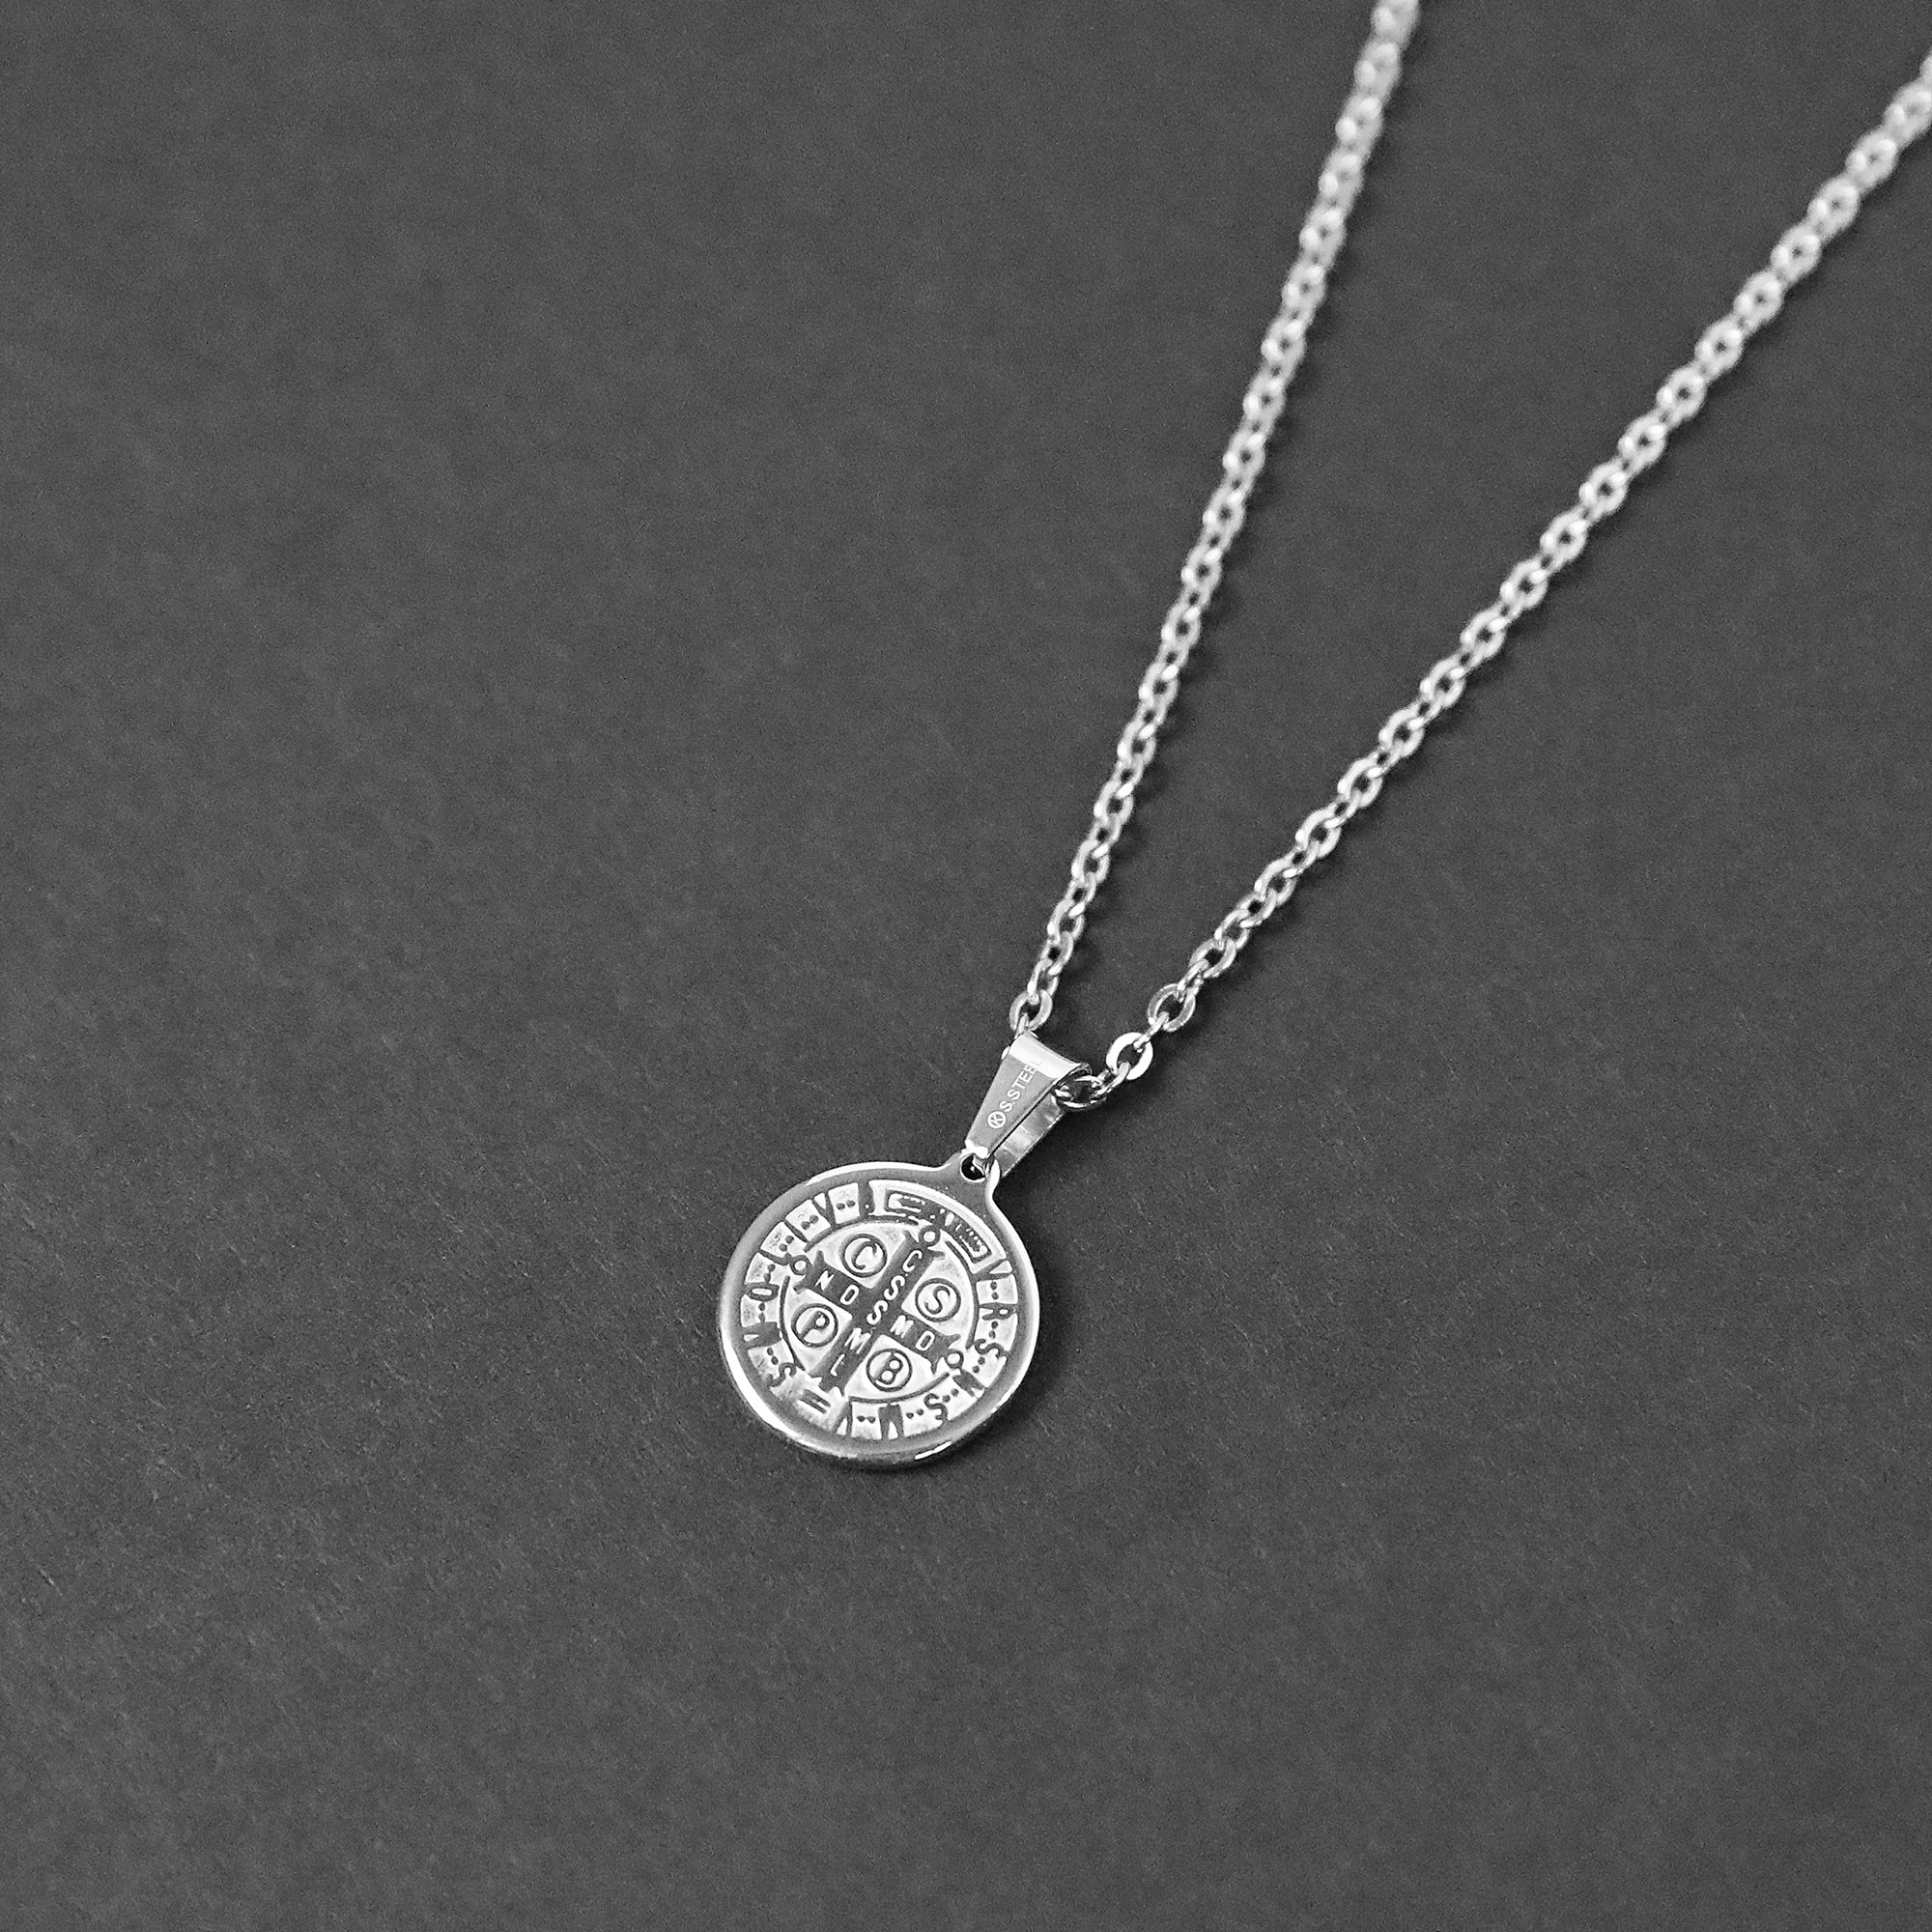 St. Benedict Small Amulet Necklace - Silver